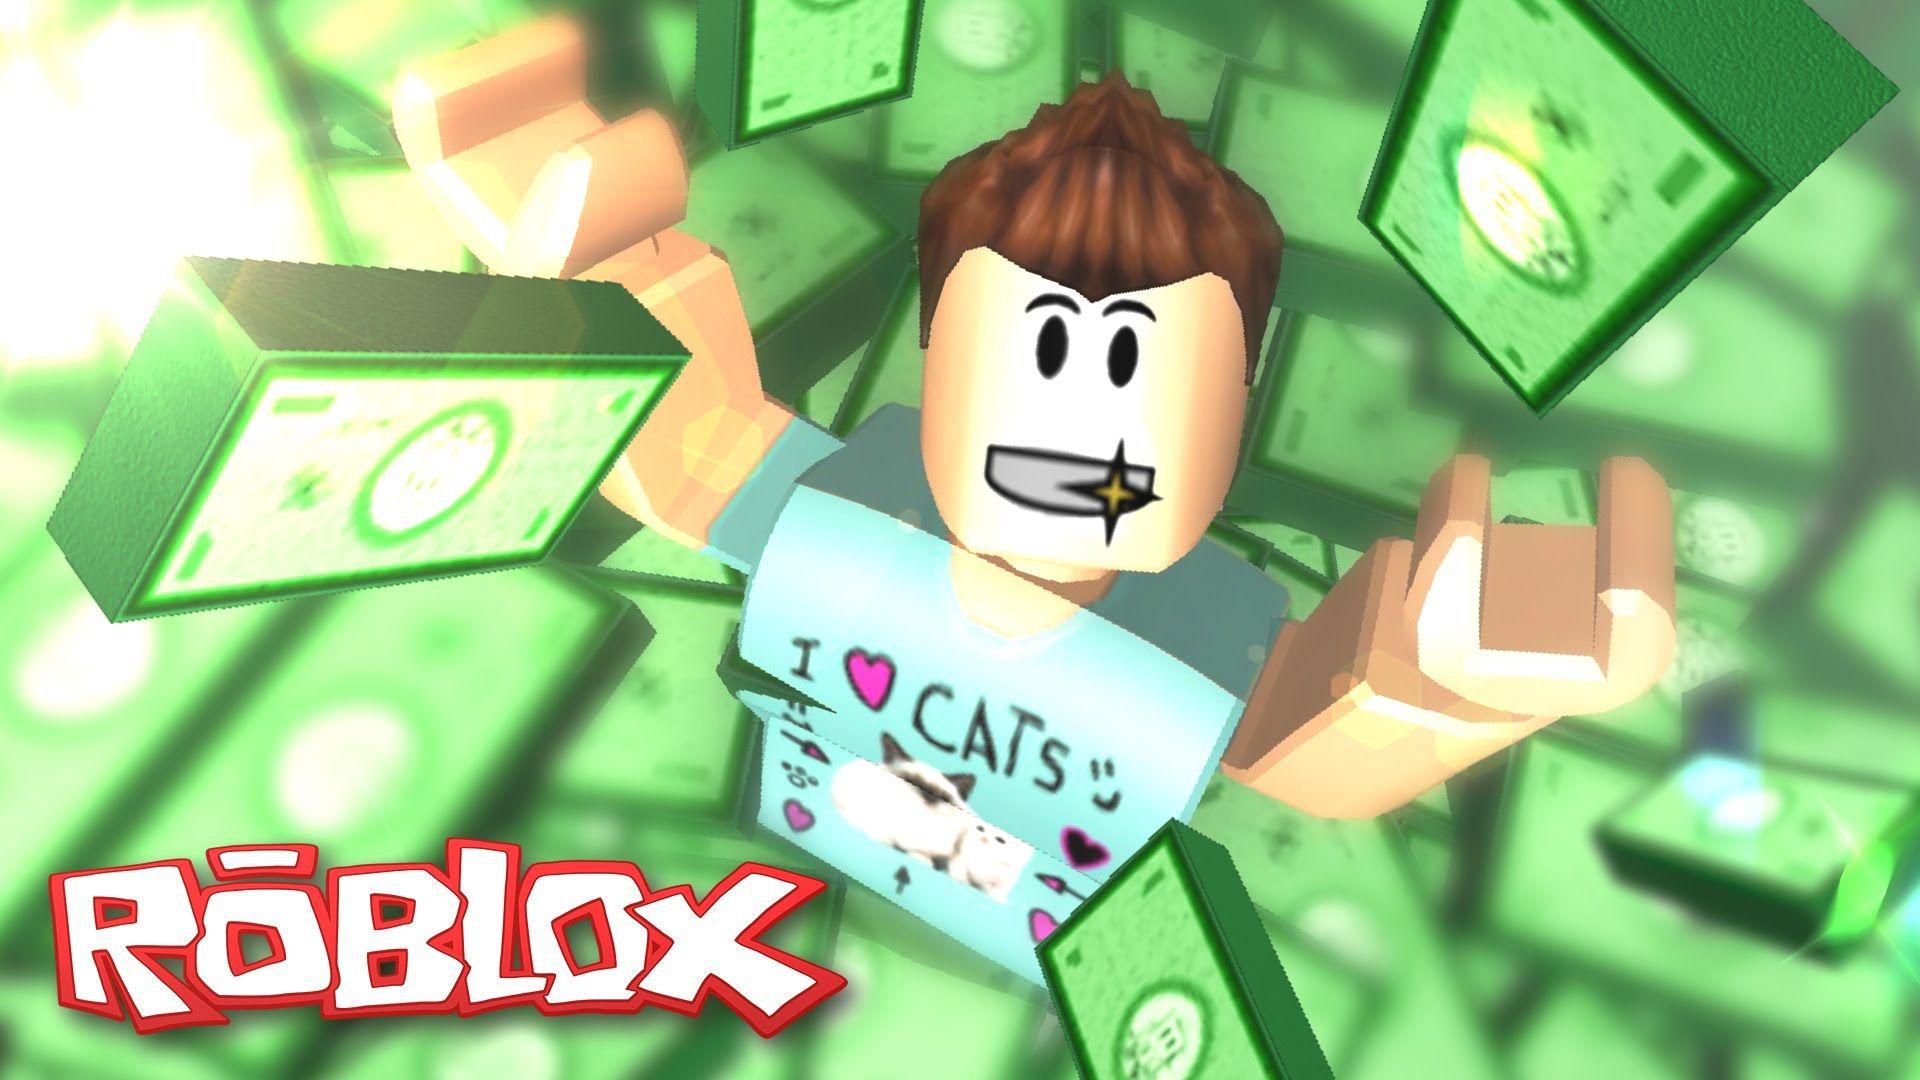 How To Download Roblox For Free On Pc Android Phone Iphone And Ipad - roblox download ipod